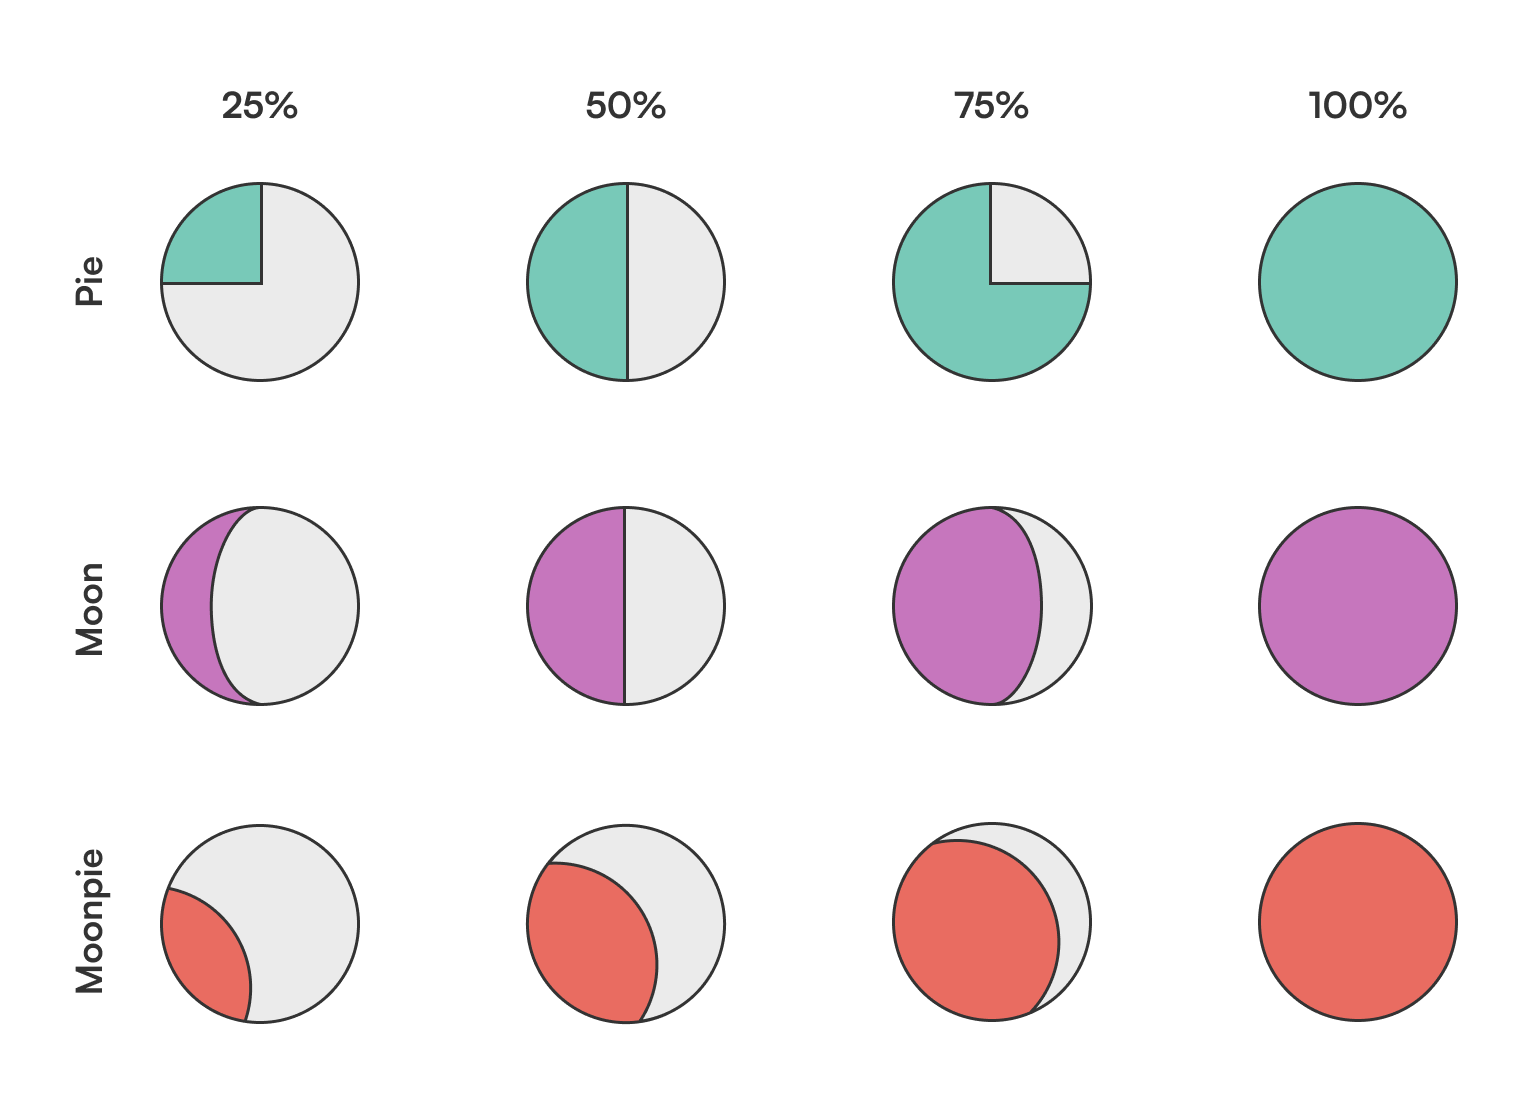 3 different circular chart variations using the area visual code are compared: the pie chart, the moon chart and the moonpie chart. All chart types are shown with different values: 25%, 50%, 75% and 100% to make the visual comparison easier.